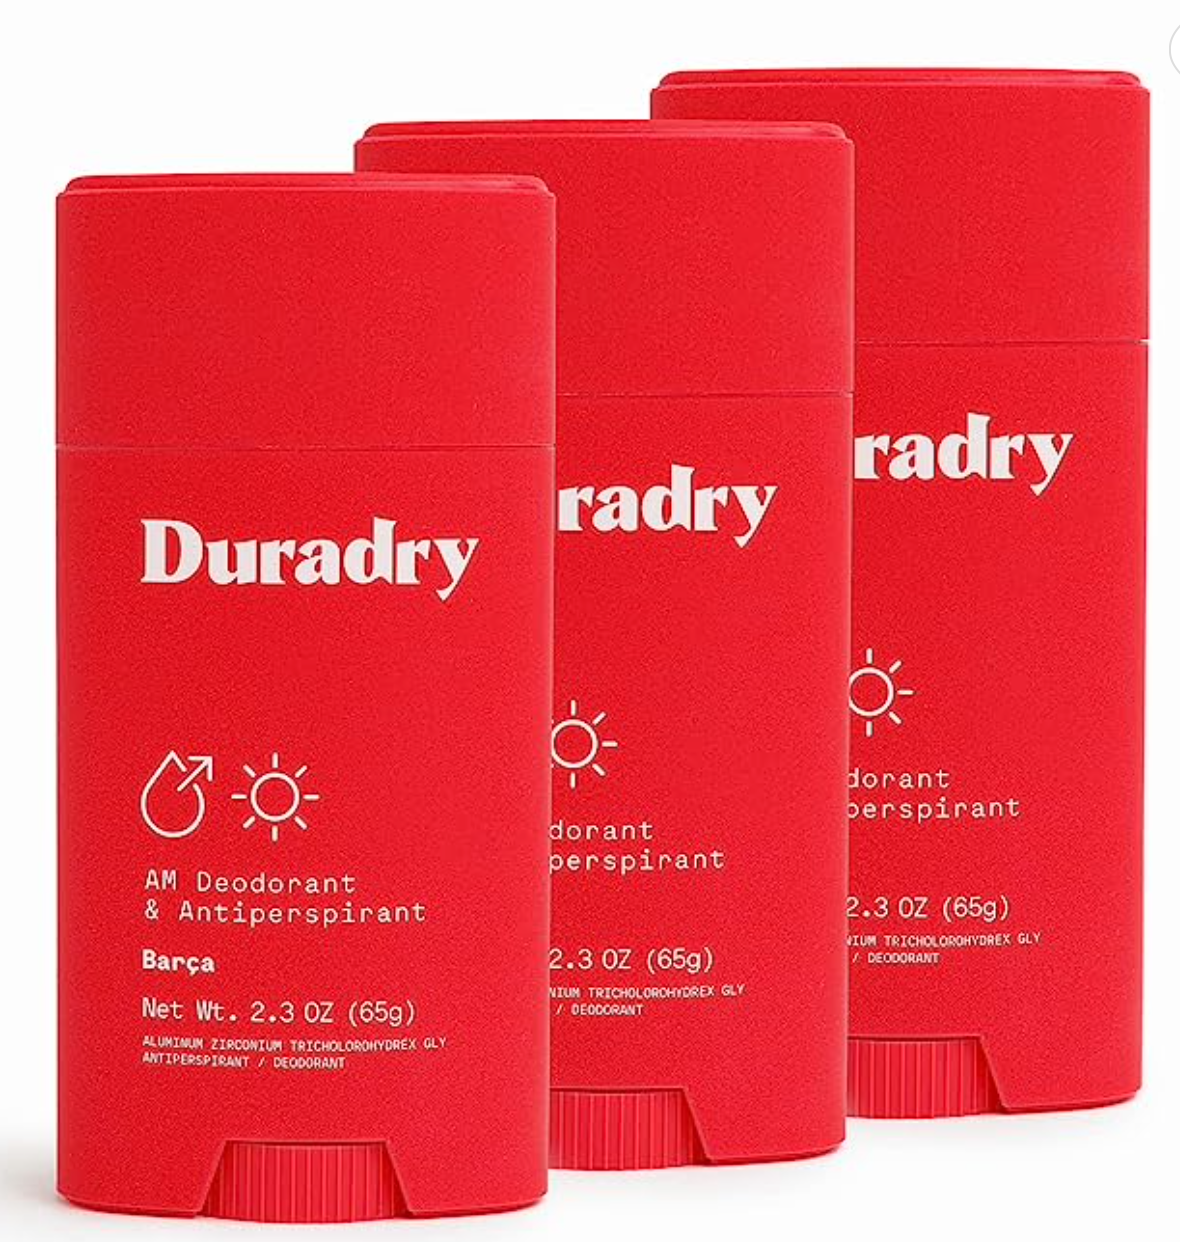 Duradry AM Deodorant & Antiperspirant - Prescription Strength Deodorant for Hyperhidrosis, Antiperspirant for Women & Men, Armpit Sweat Protection, Silicone-free - End Game, 2.3 Oz (Pack of 3)